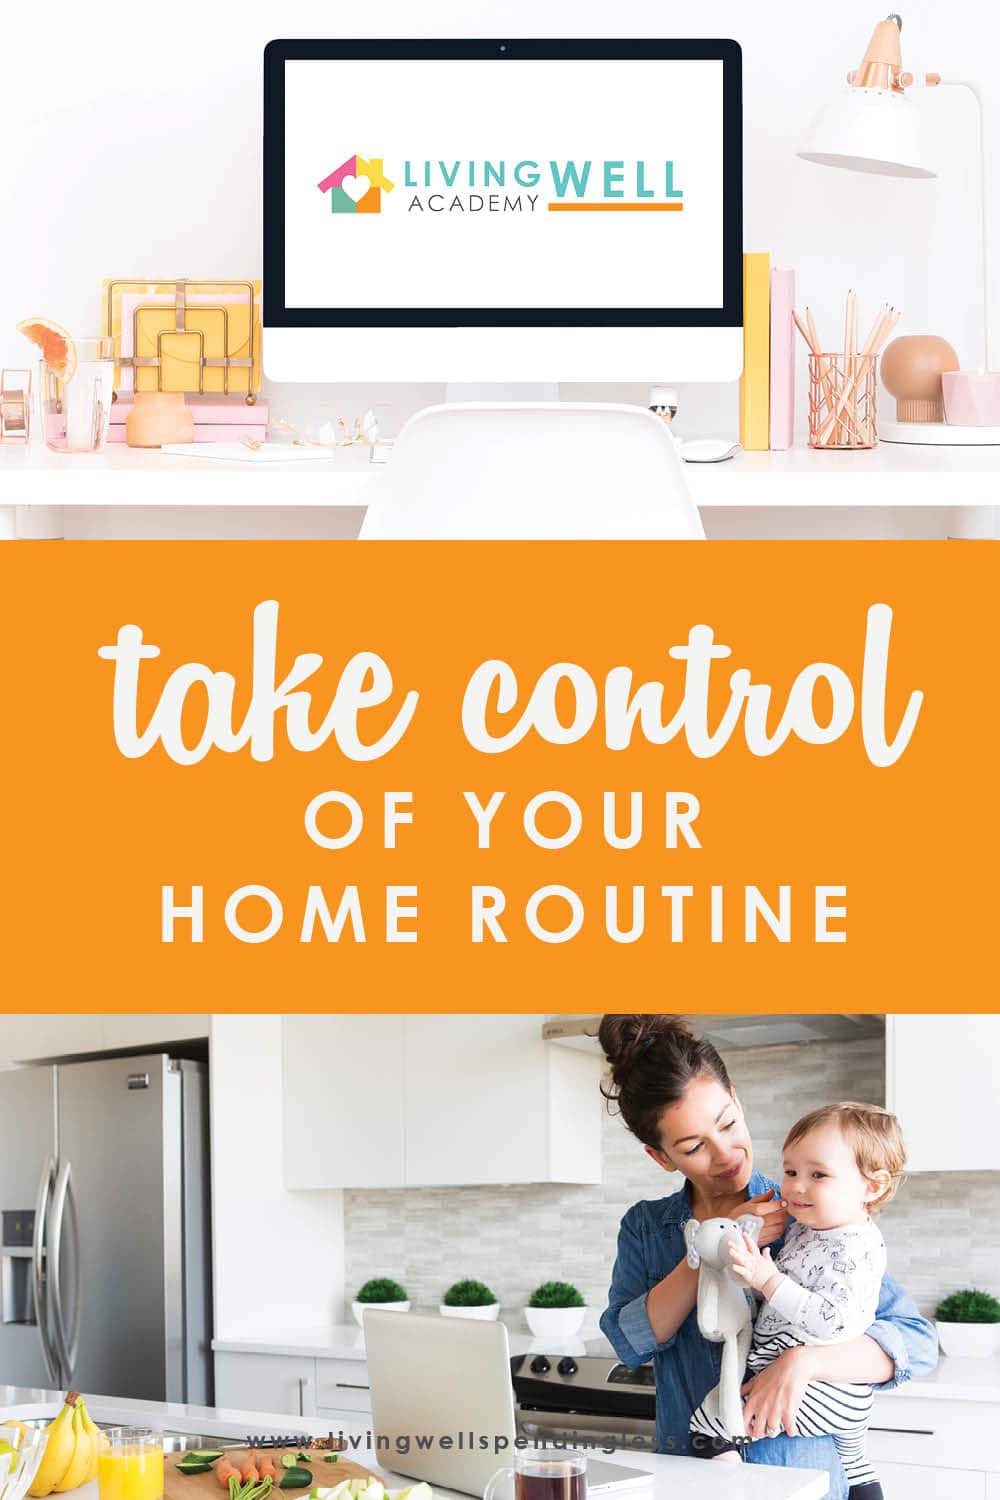 Want to Take Control of Your Home Routine? Don't Miss This! | Living Well Academy The world is a little crazy right now, and with all the stress and uncertainty going around, something to focus on to help you in all areas of life might be exactly what you need. Living Well Academy is a life management course created explicitly to help you feel productive and confident in four key areas: habits and routine, simplifying mealtime, keeping tidy, and mastering money. After this course, you will feel ready to tackle whatever craziness comes your way! Don't miss this first launch that we'll be hosting live! #lifegoals #mastermoney #smartmoney #foodmadesimple #lifemanagement #lifecourse #empowered